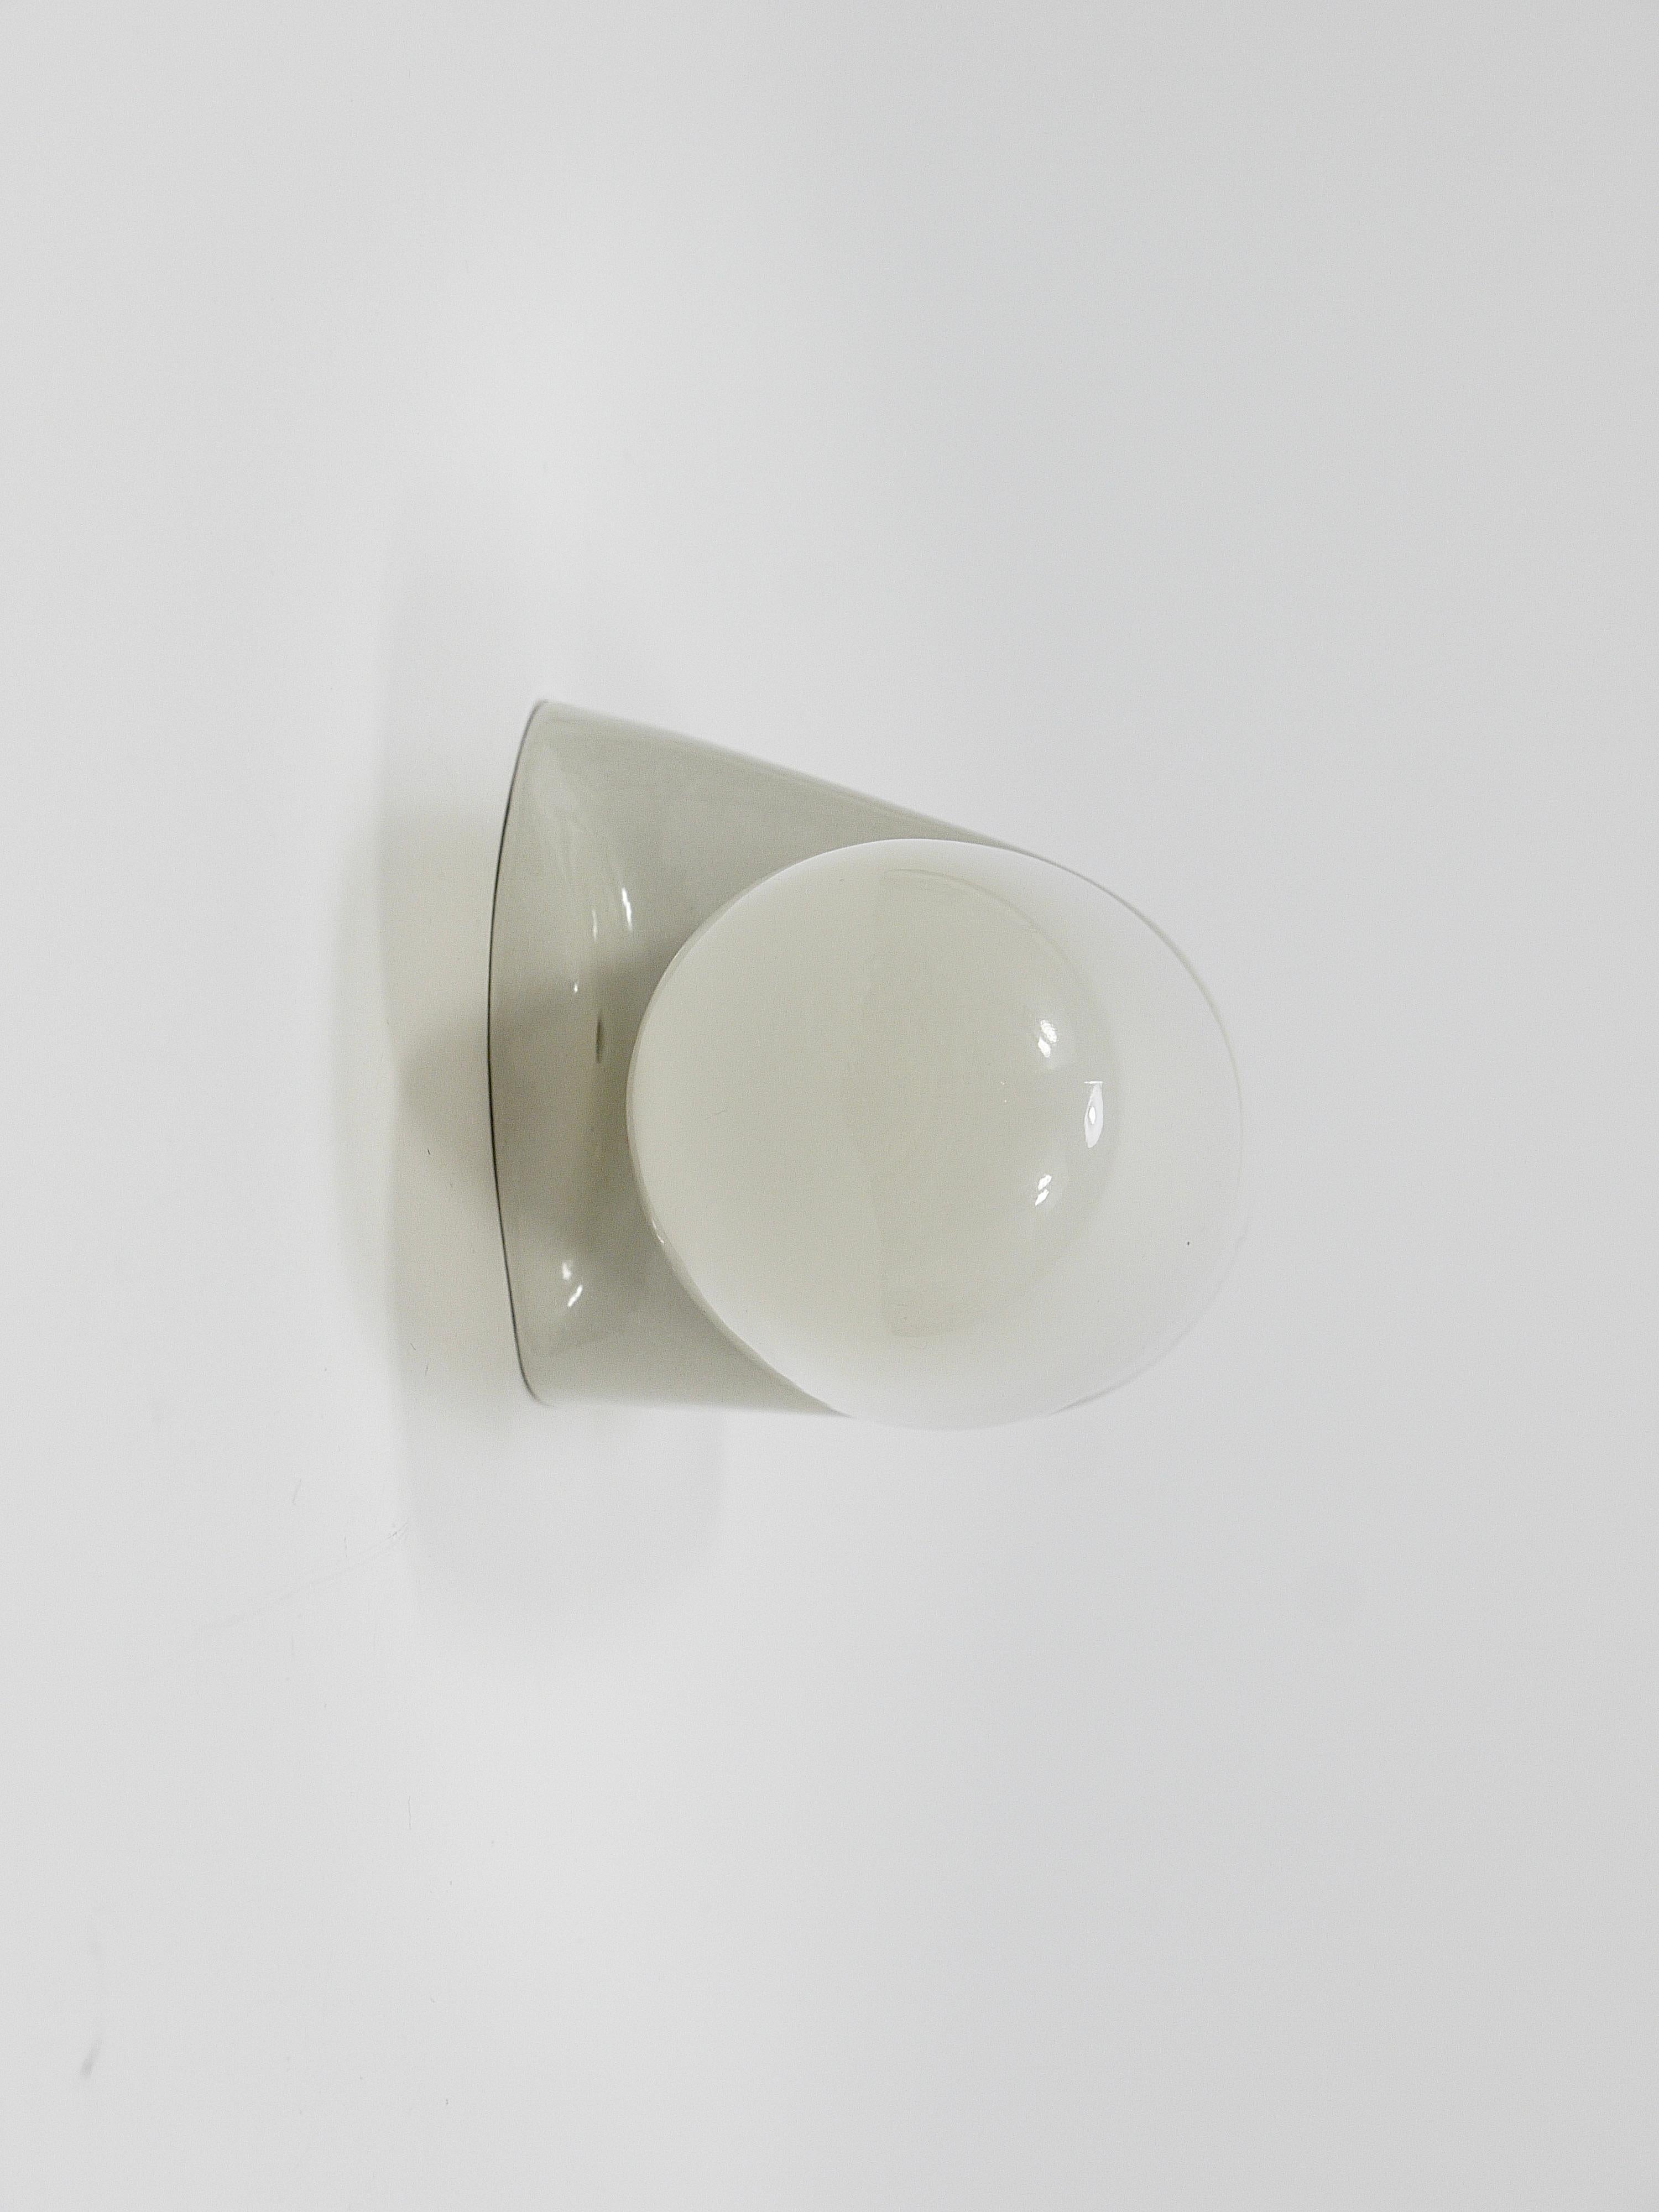 Wilhelm Wagenfeld Bauhaus Sconce / Double Wall Light by Linder Germany, 1950s For Sale 1